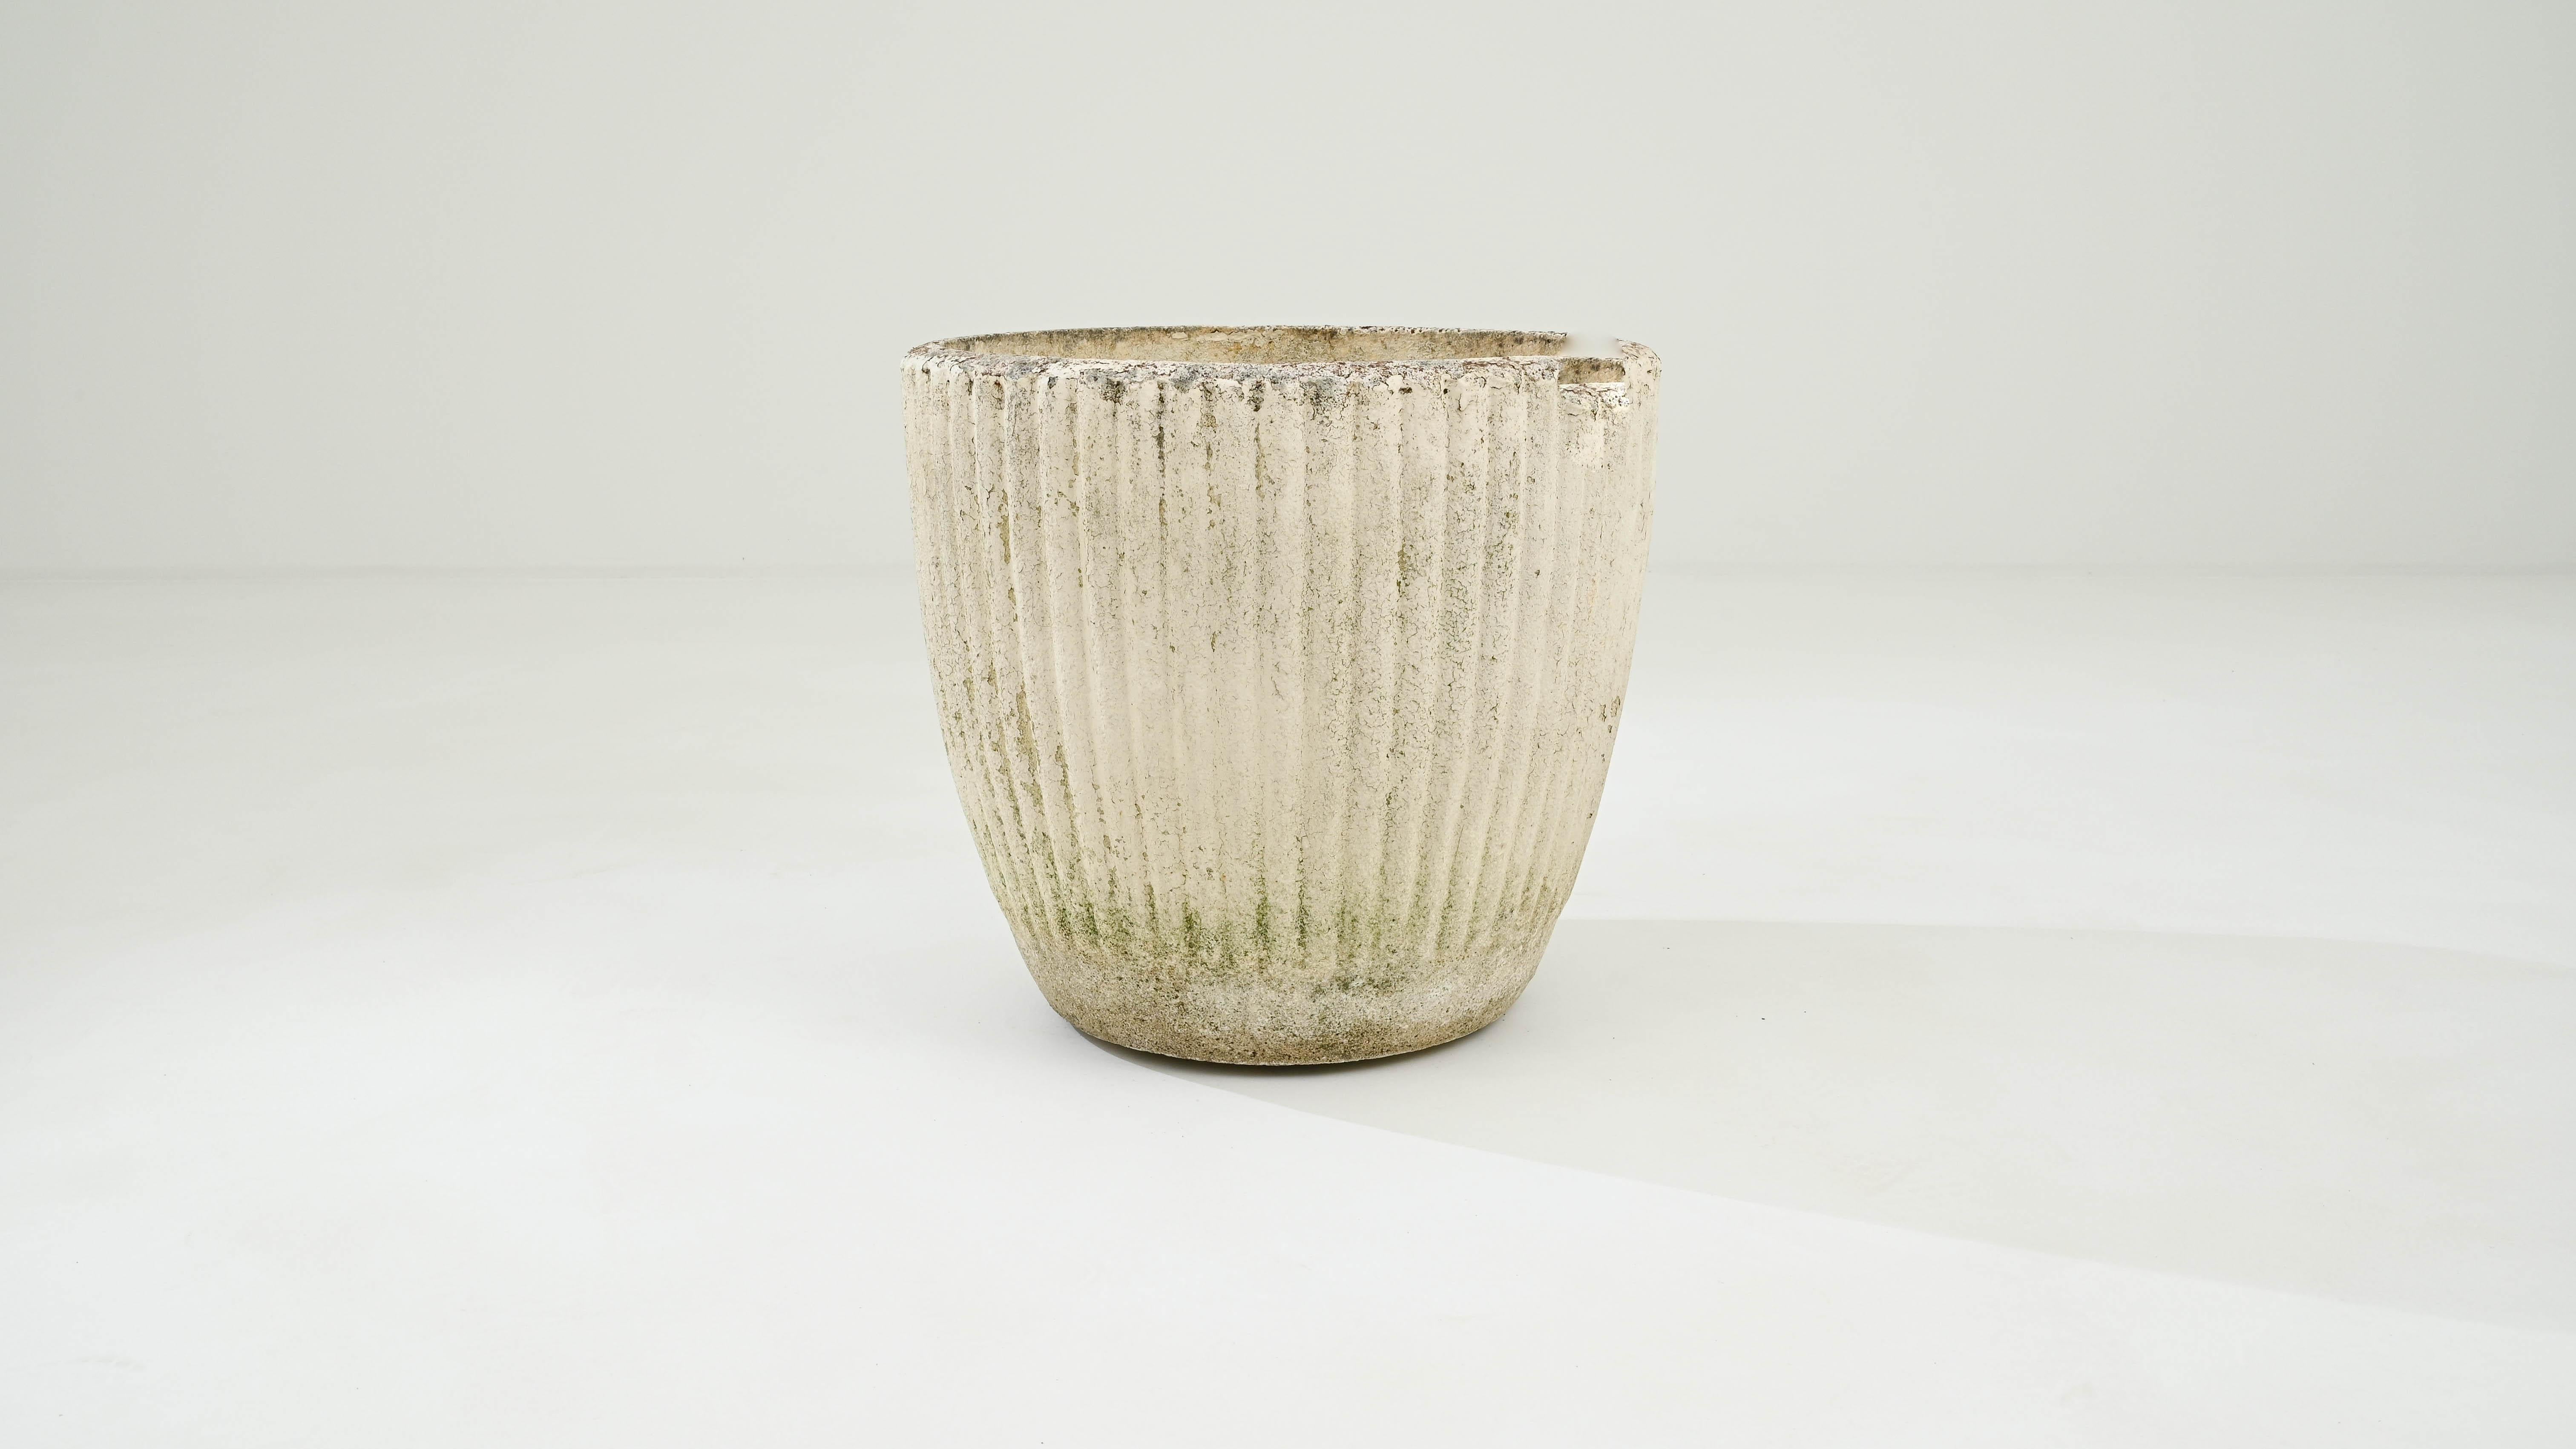 This brutalist concrete planter was designed in France during the 20th century. The attractive, riffled texture of its surface is punctuated by a weathered patina. Originally ivory white, over time, it has acquired a subtle green hue on the sides,